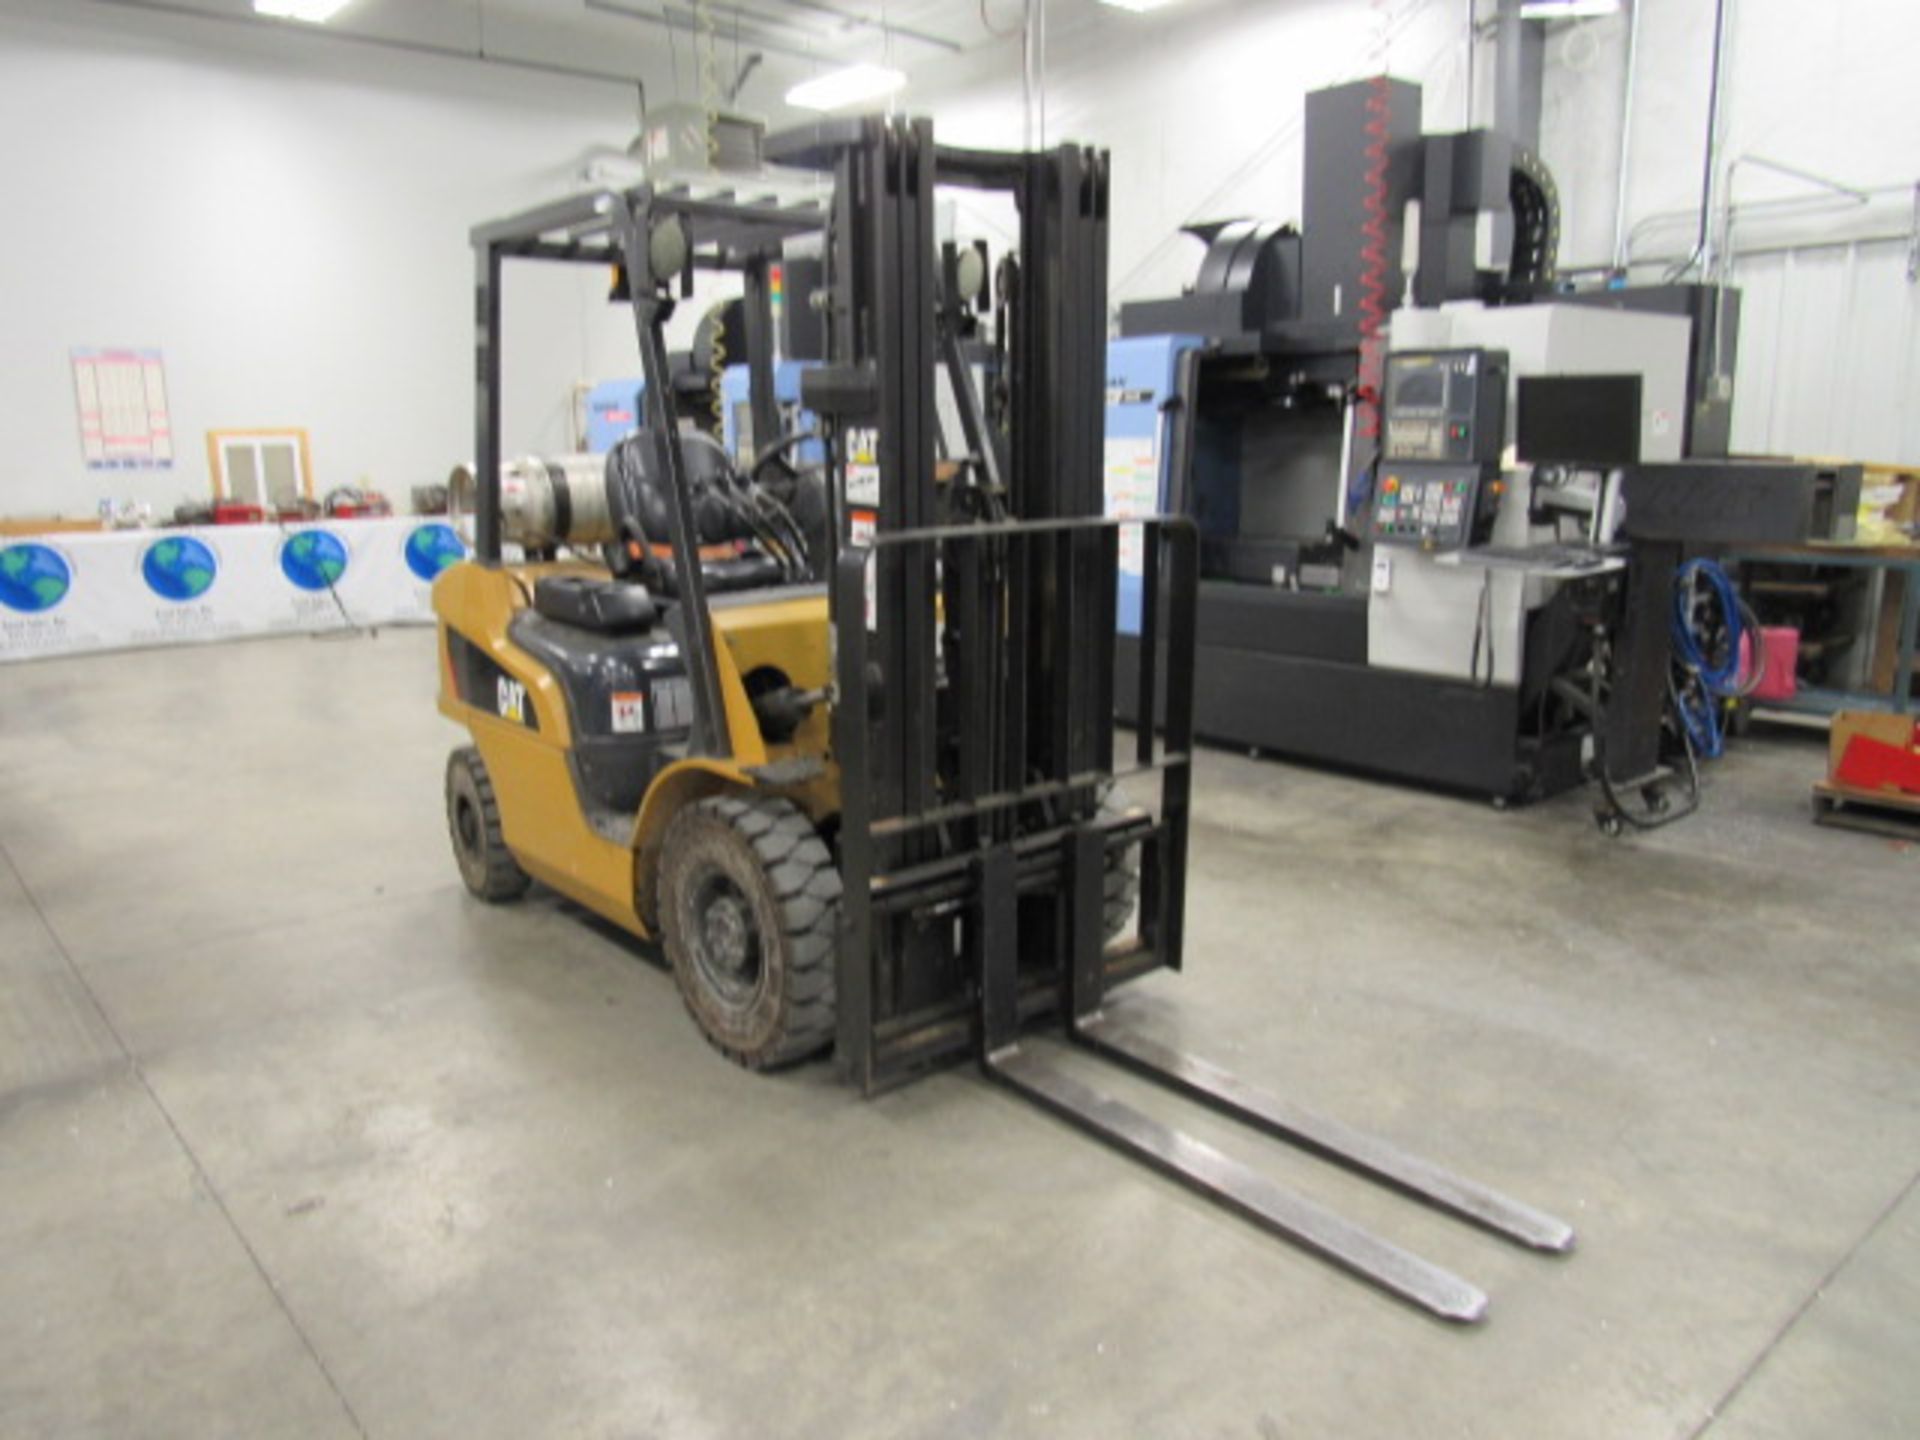 CAT Model 2P5000 5,000 lb. Capacity LP Forklift with Side Shift, Headlights, Safety Light, Outdoor - Image 7 of 8